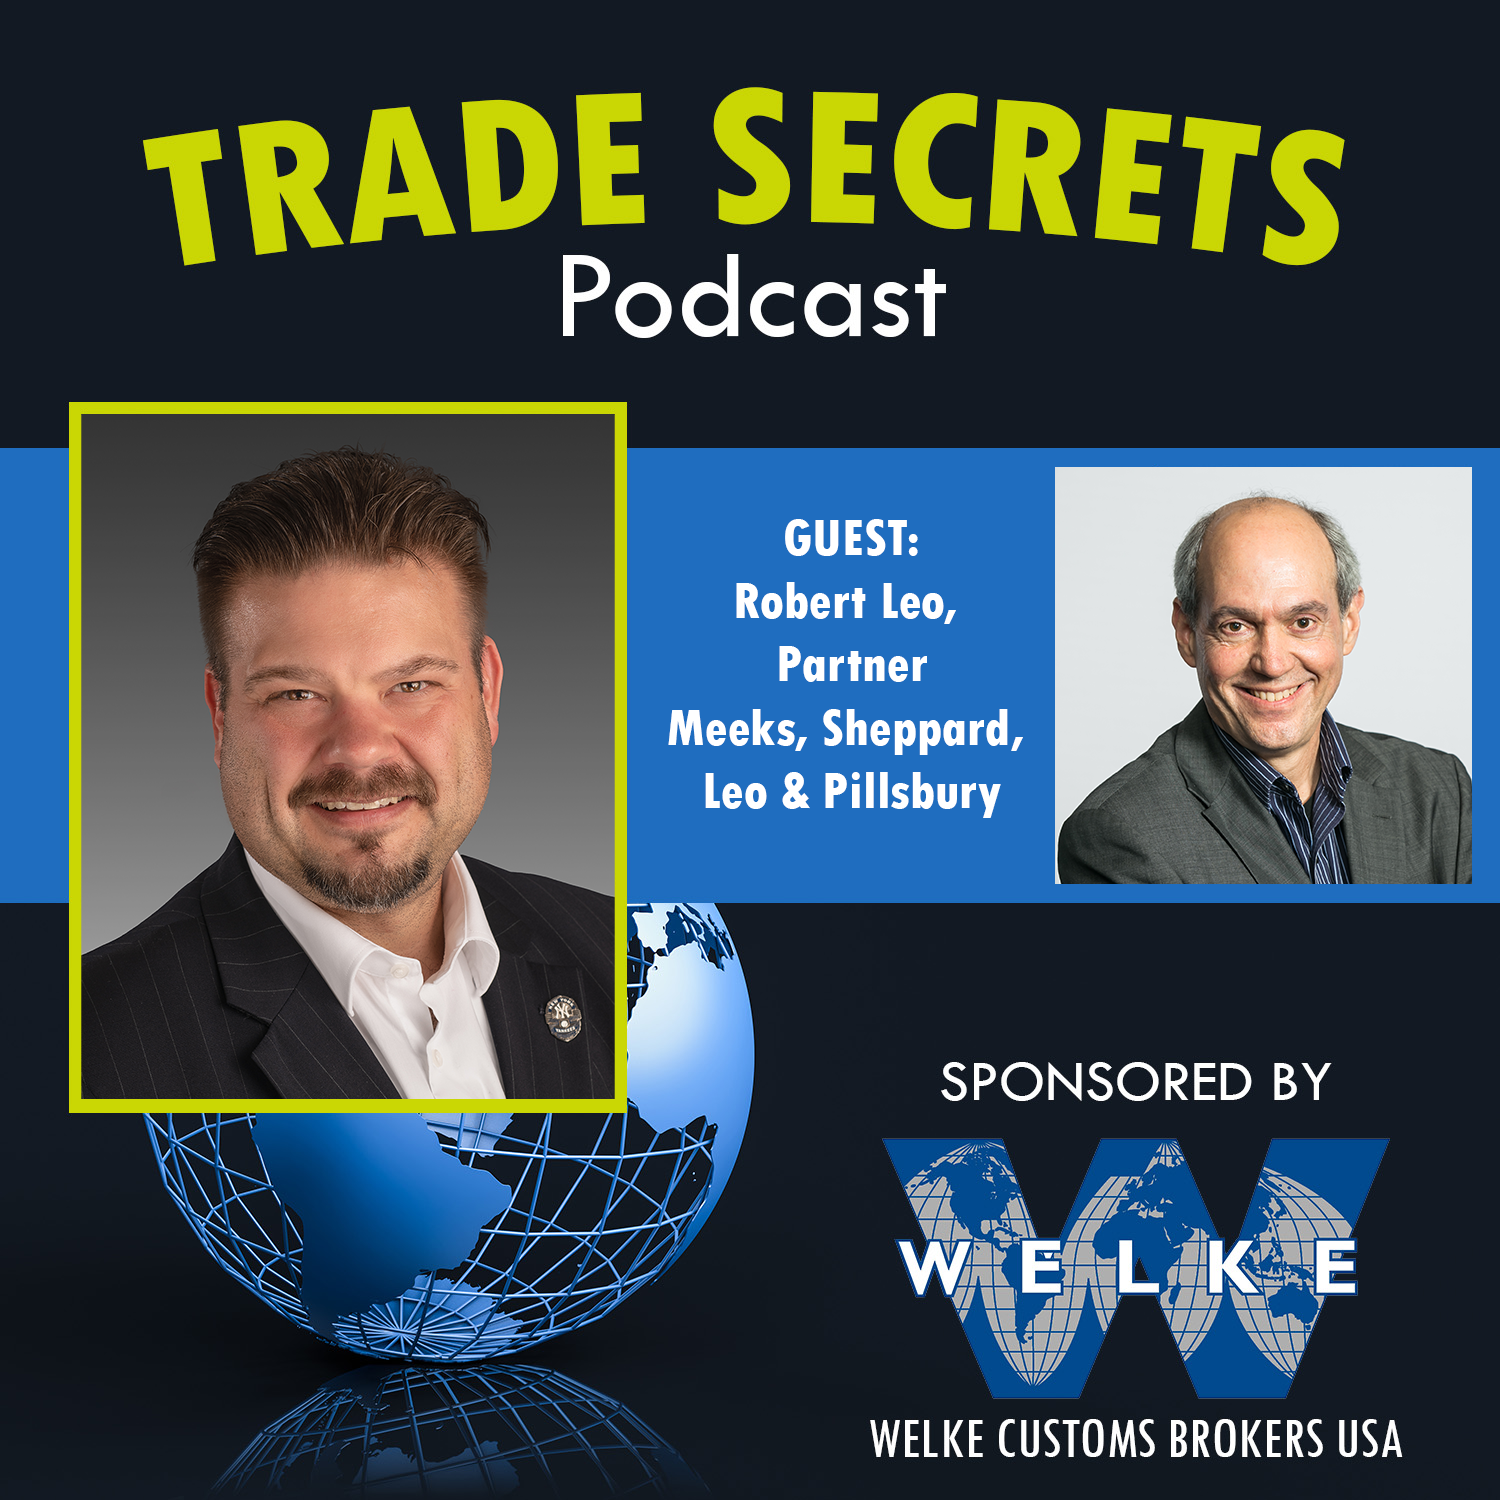 Trade Secrets - Episode 26 Robert Leo Returns for a Discussion on Russia's Sanctions and 301 Duties